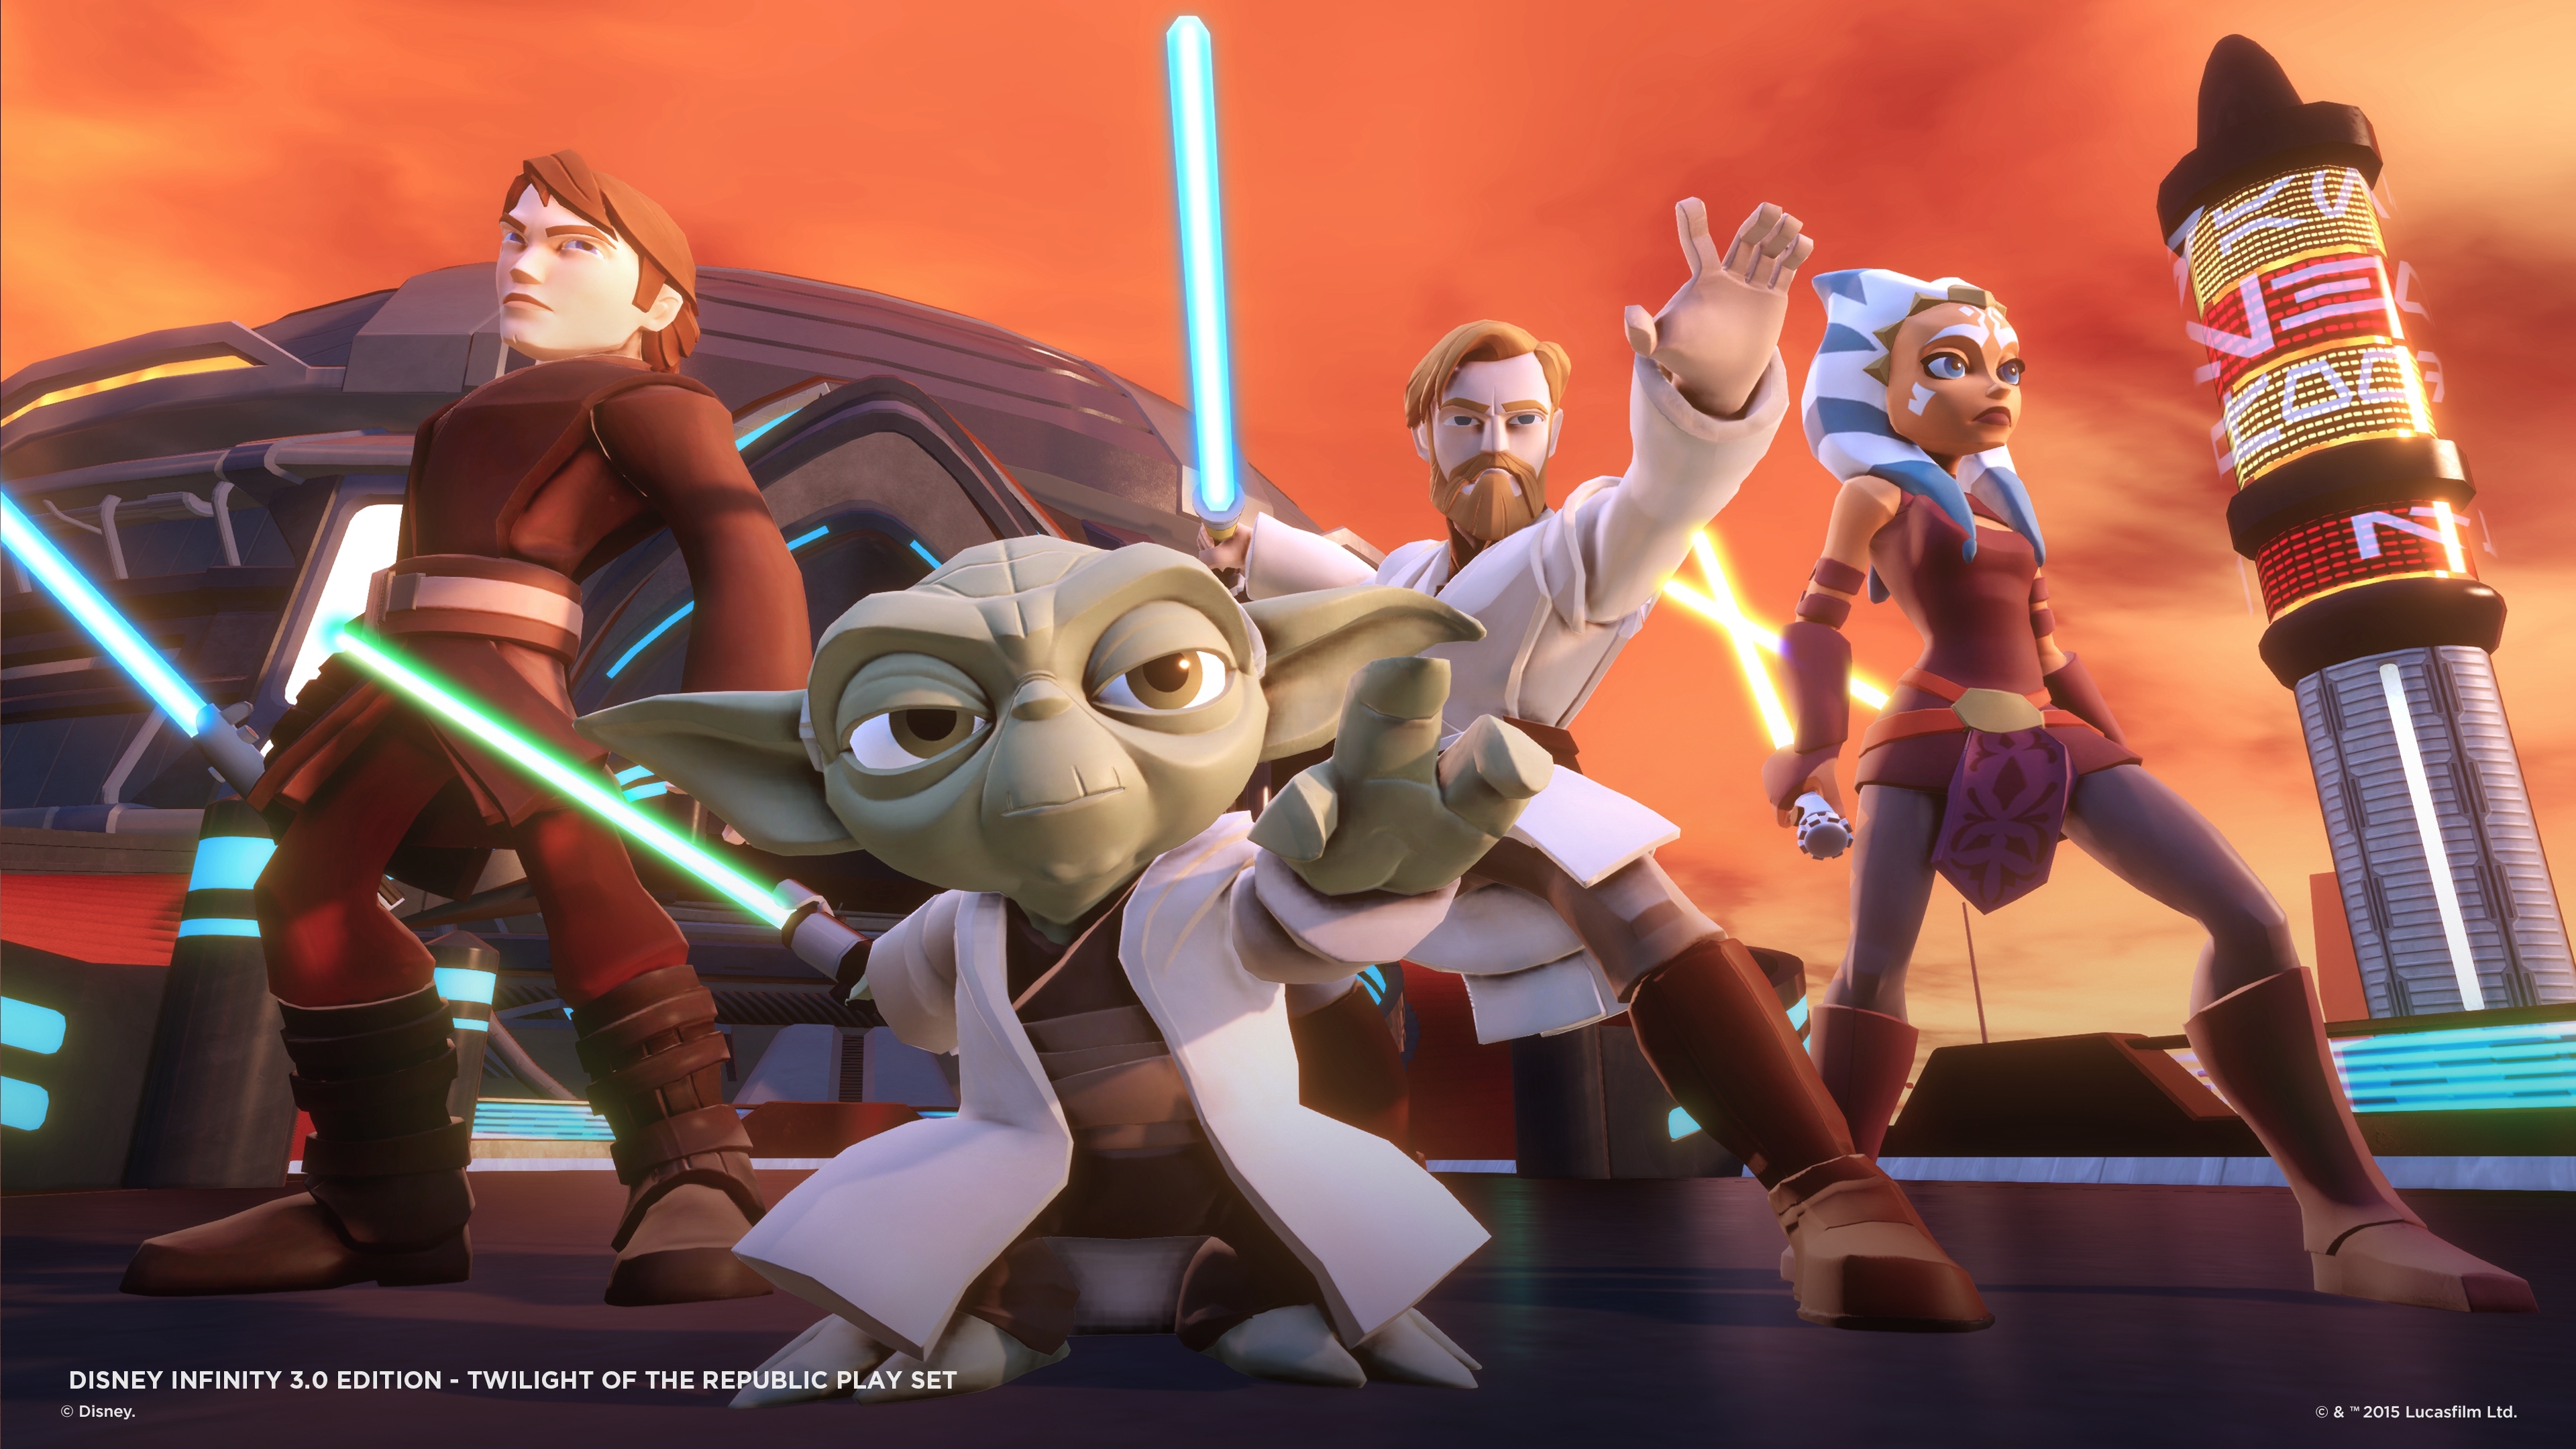 Disney Infinity 3.0 Edition Launches in North America